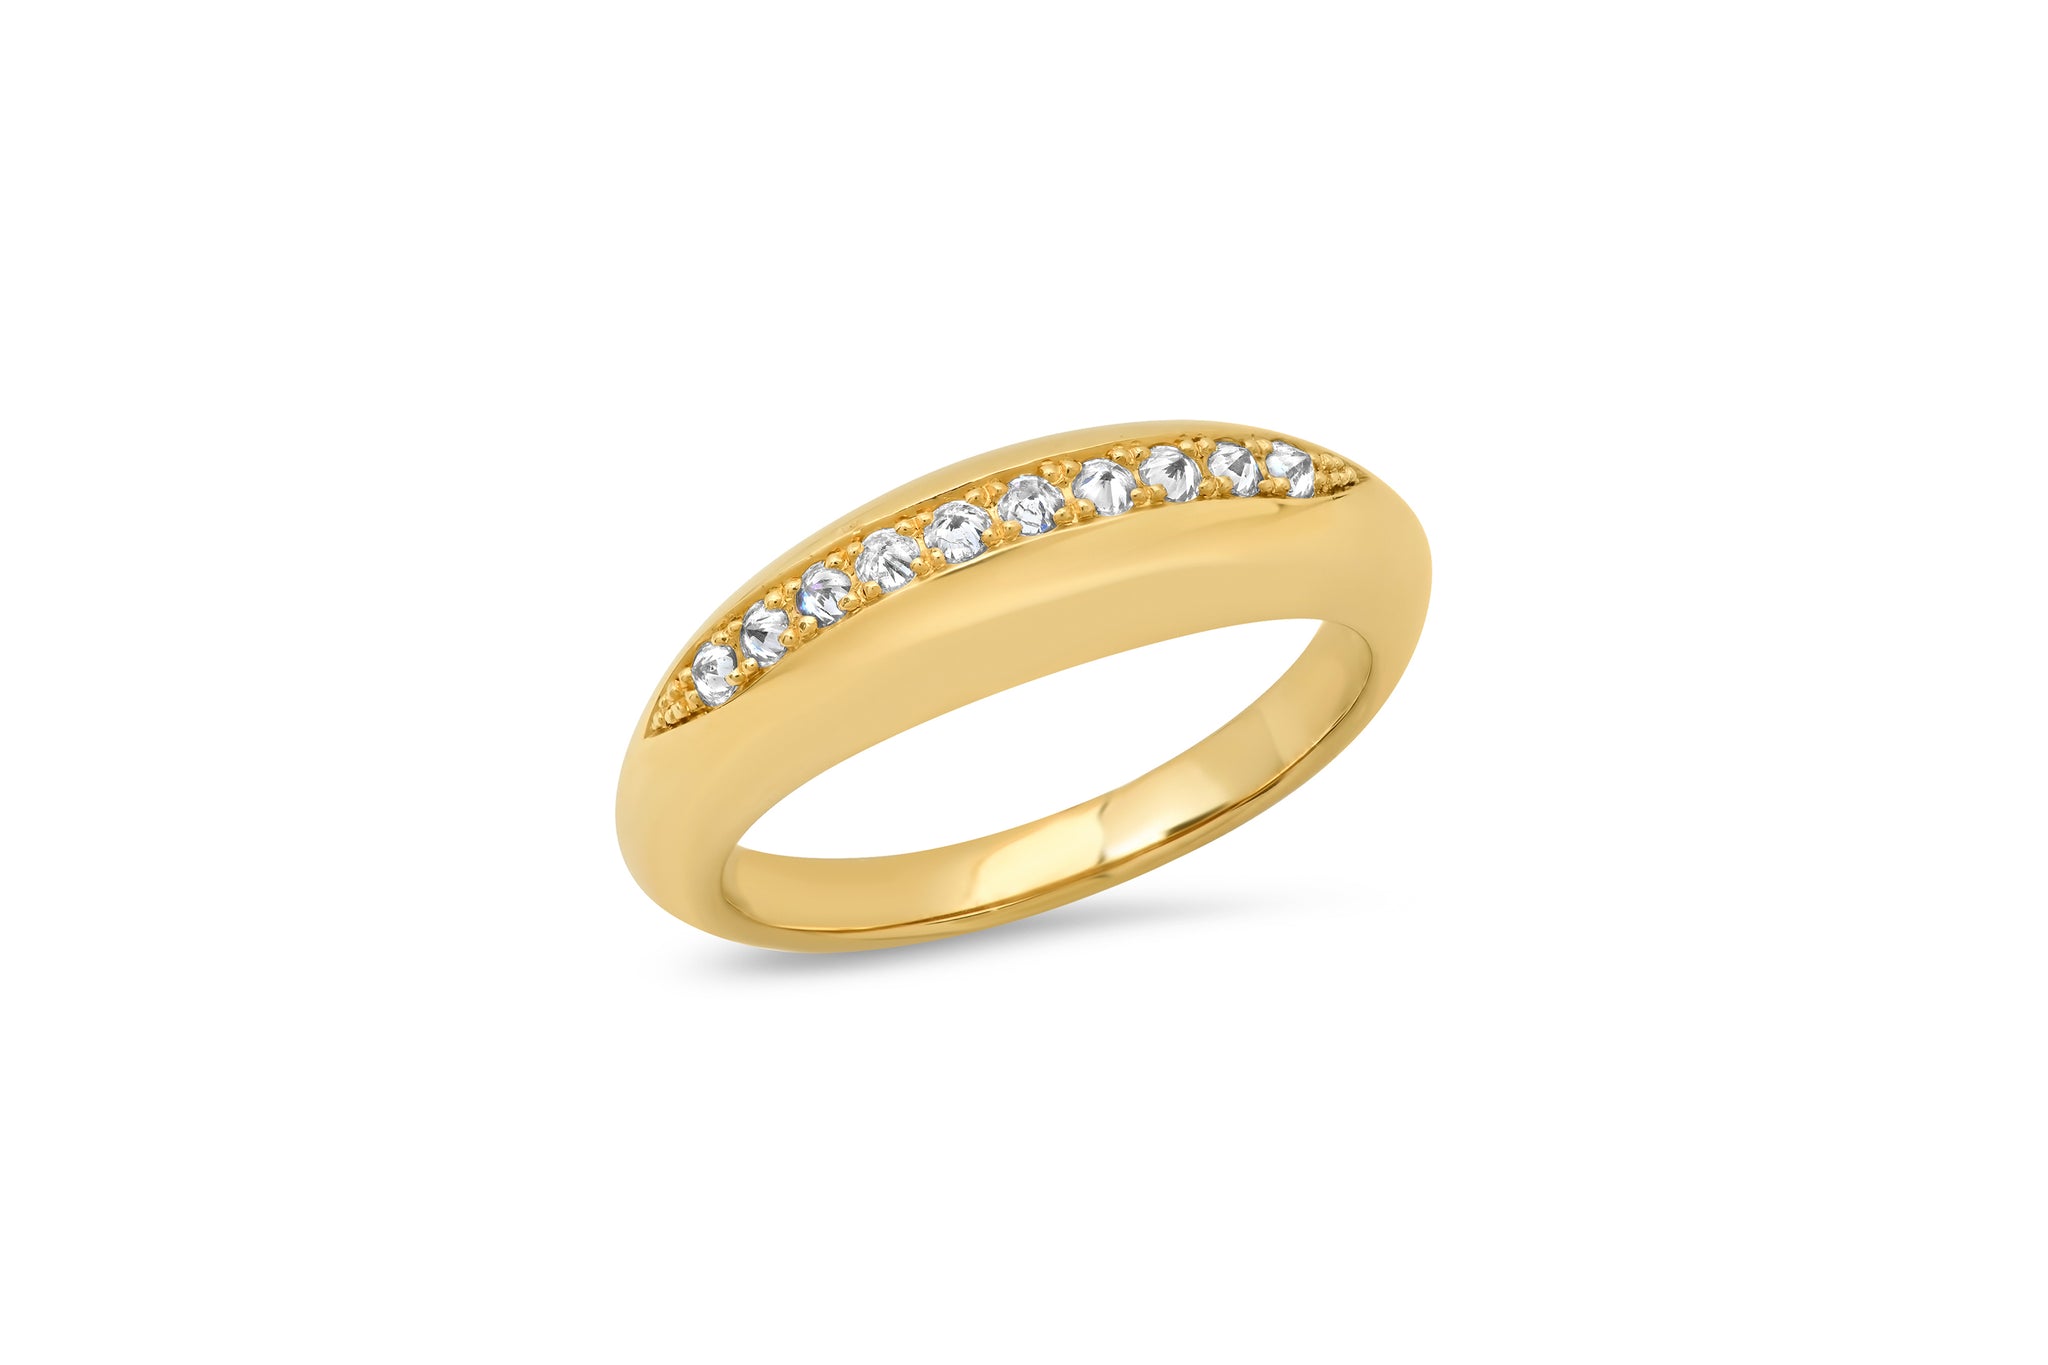 Small Inverted Diamond Domed Ring